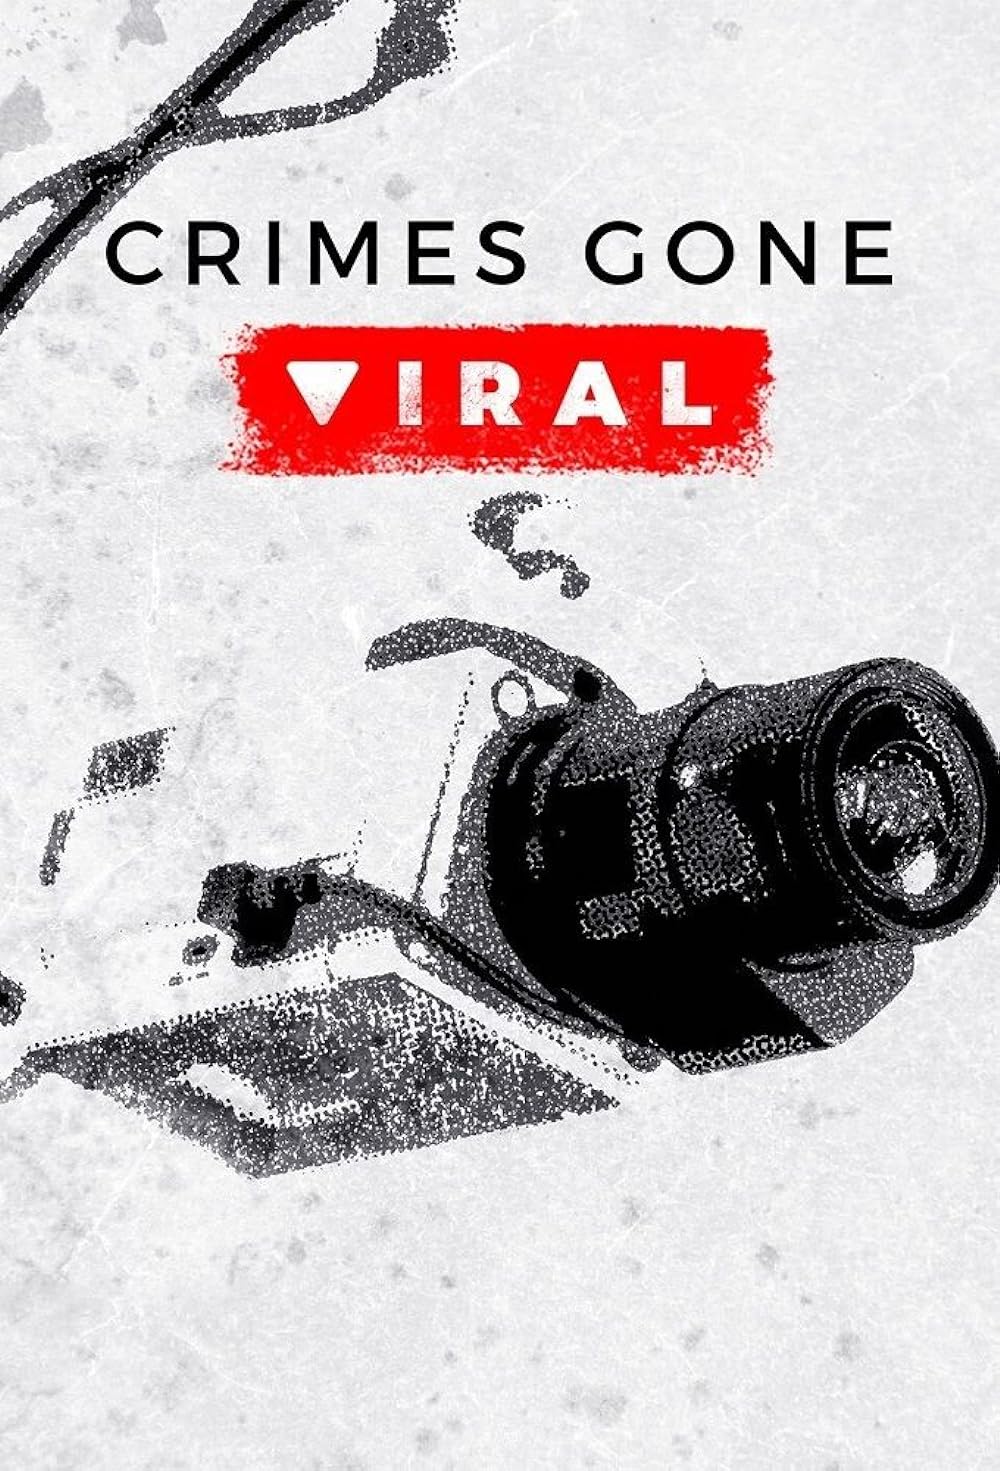 Gone Viral download the last version for ipod